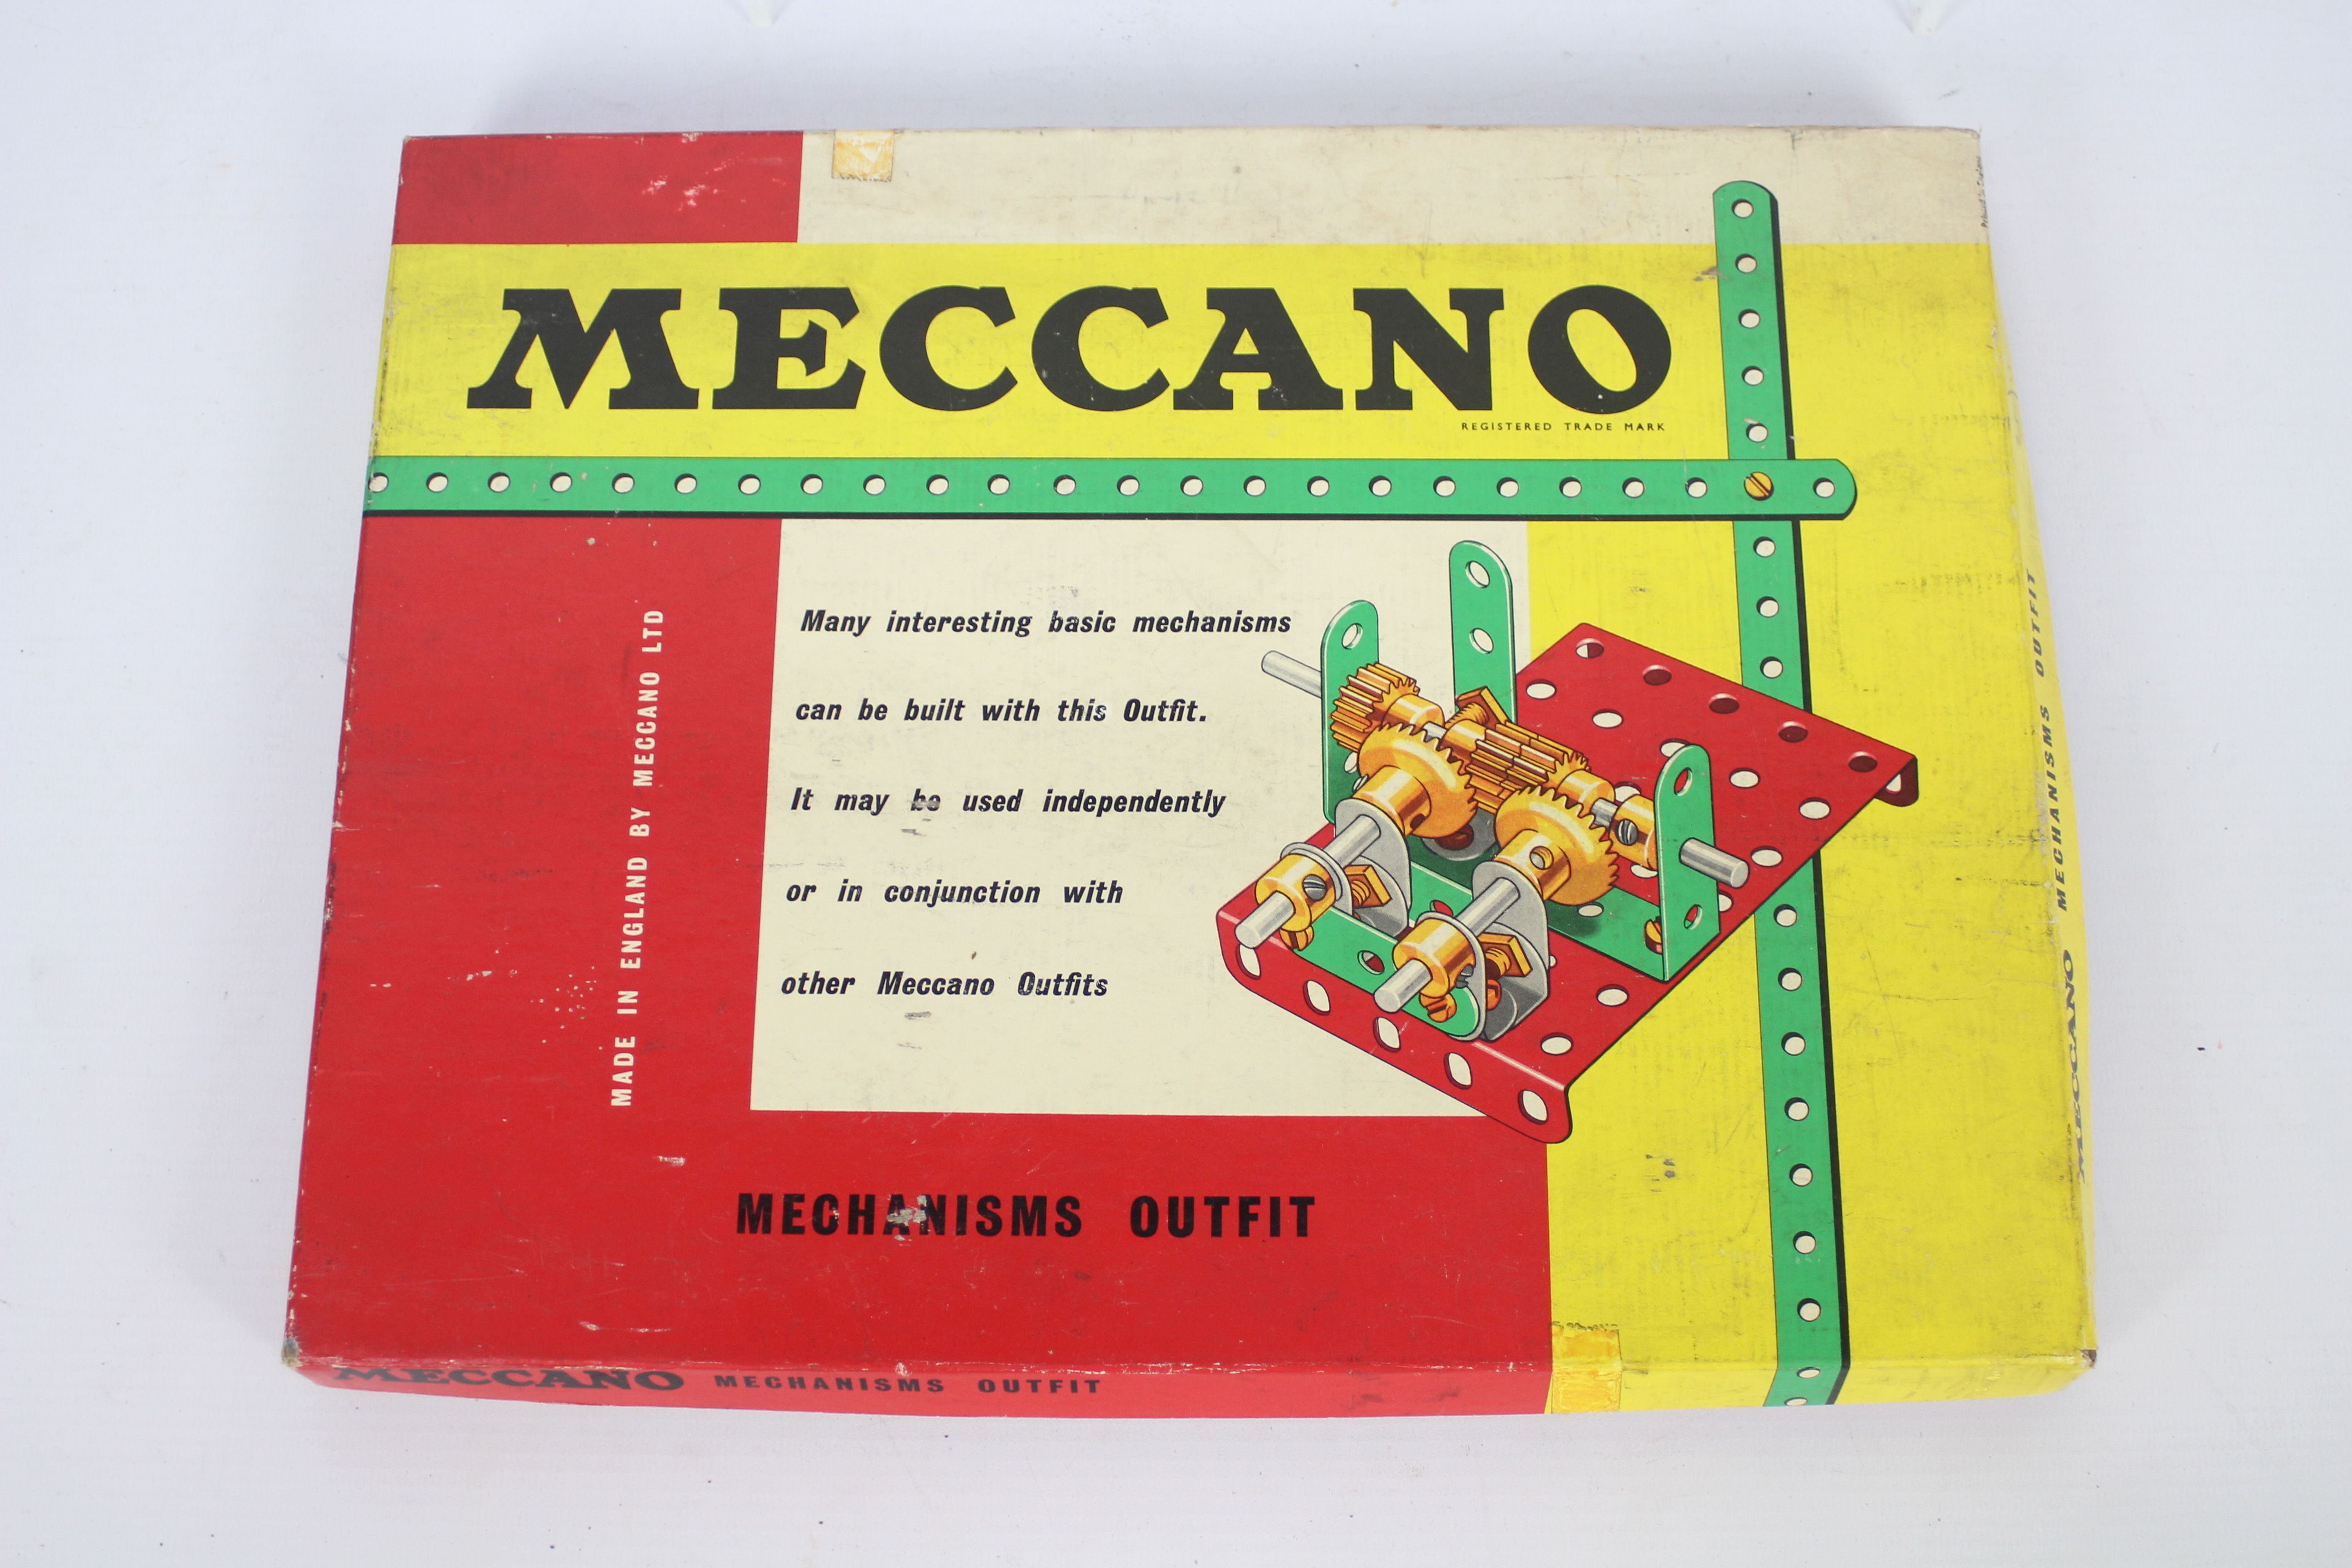 Meccano - A circa 1959 Meccano Mechanisms Outfit with the contents still covered in cellophane and - Image 5 of 5